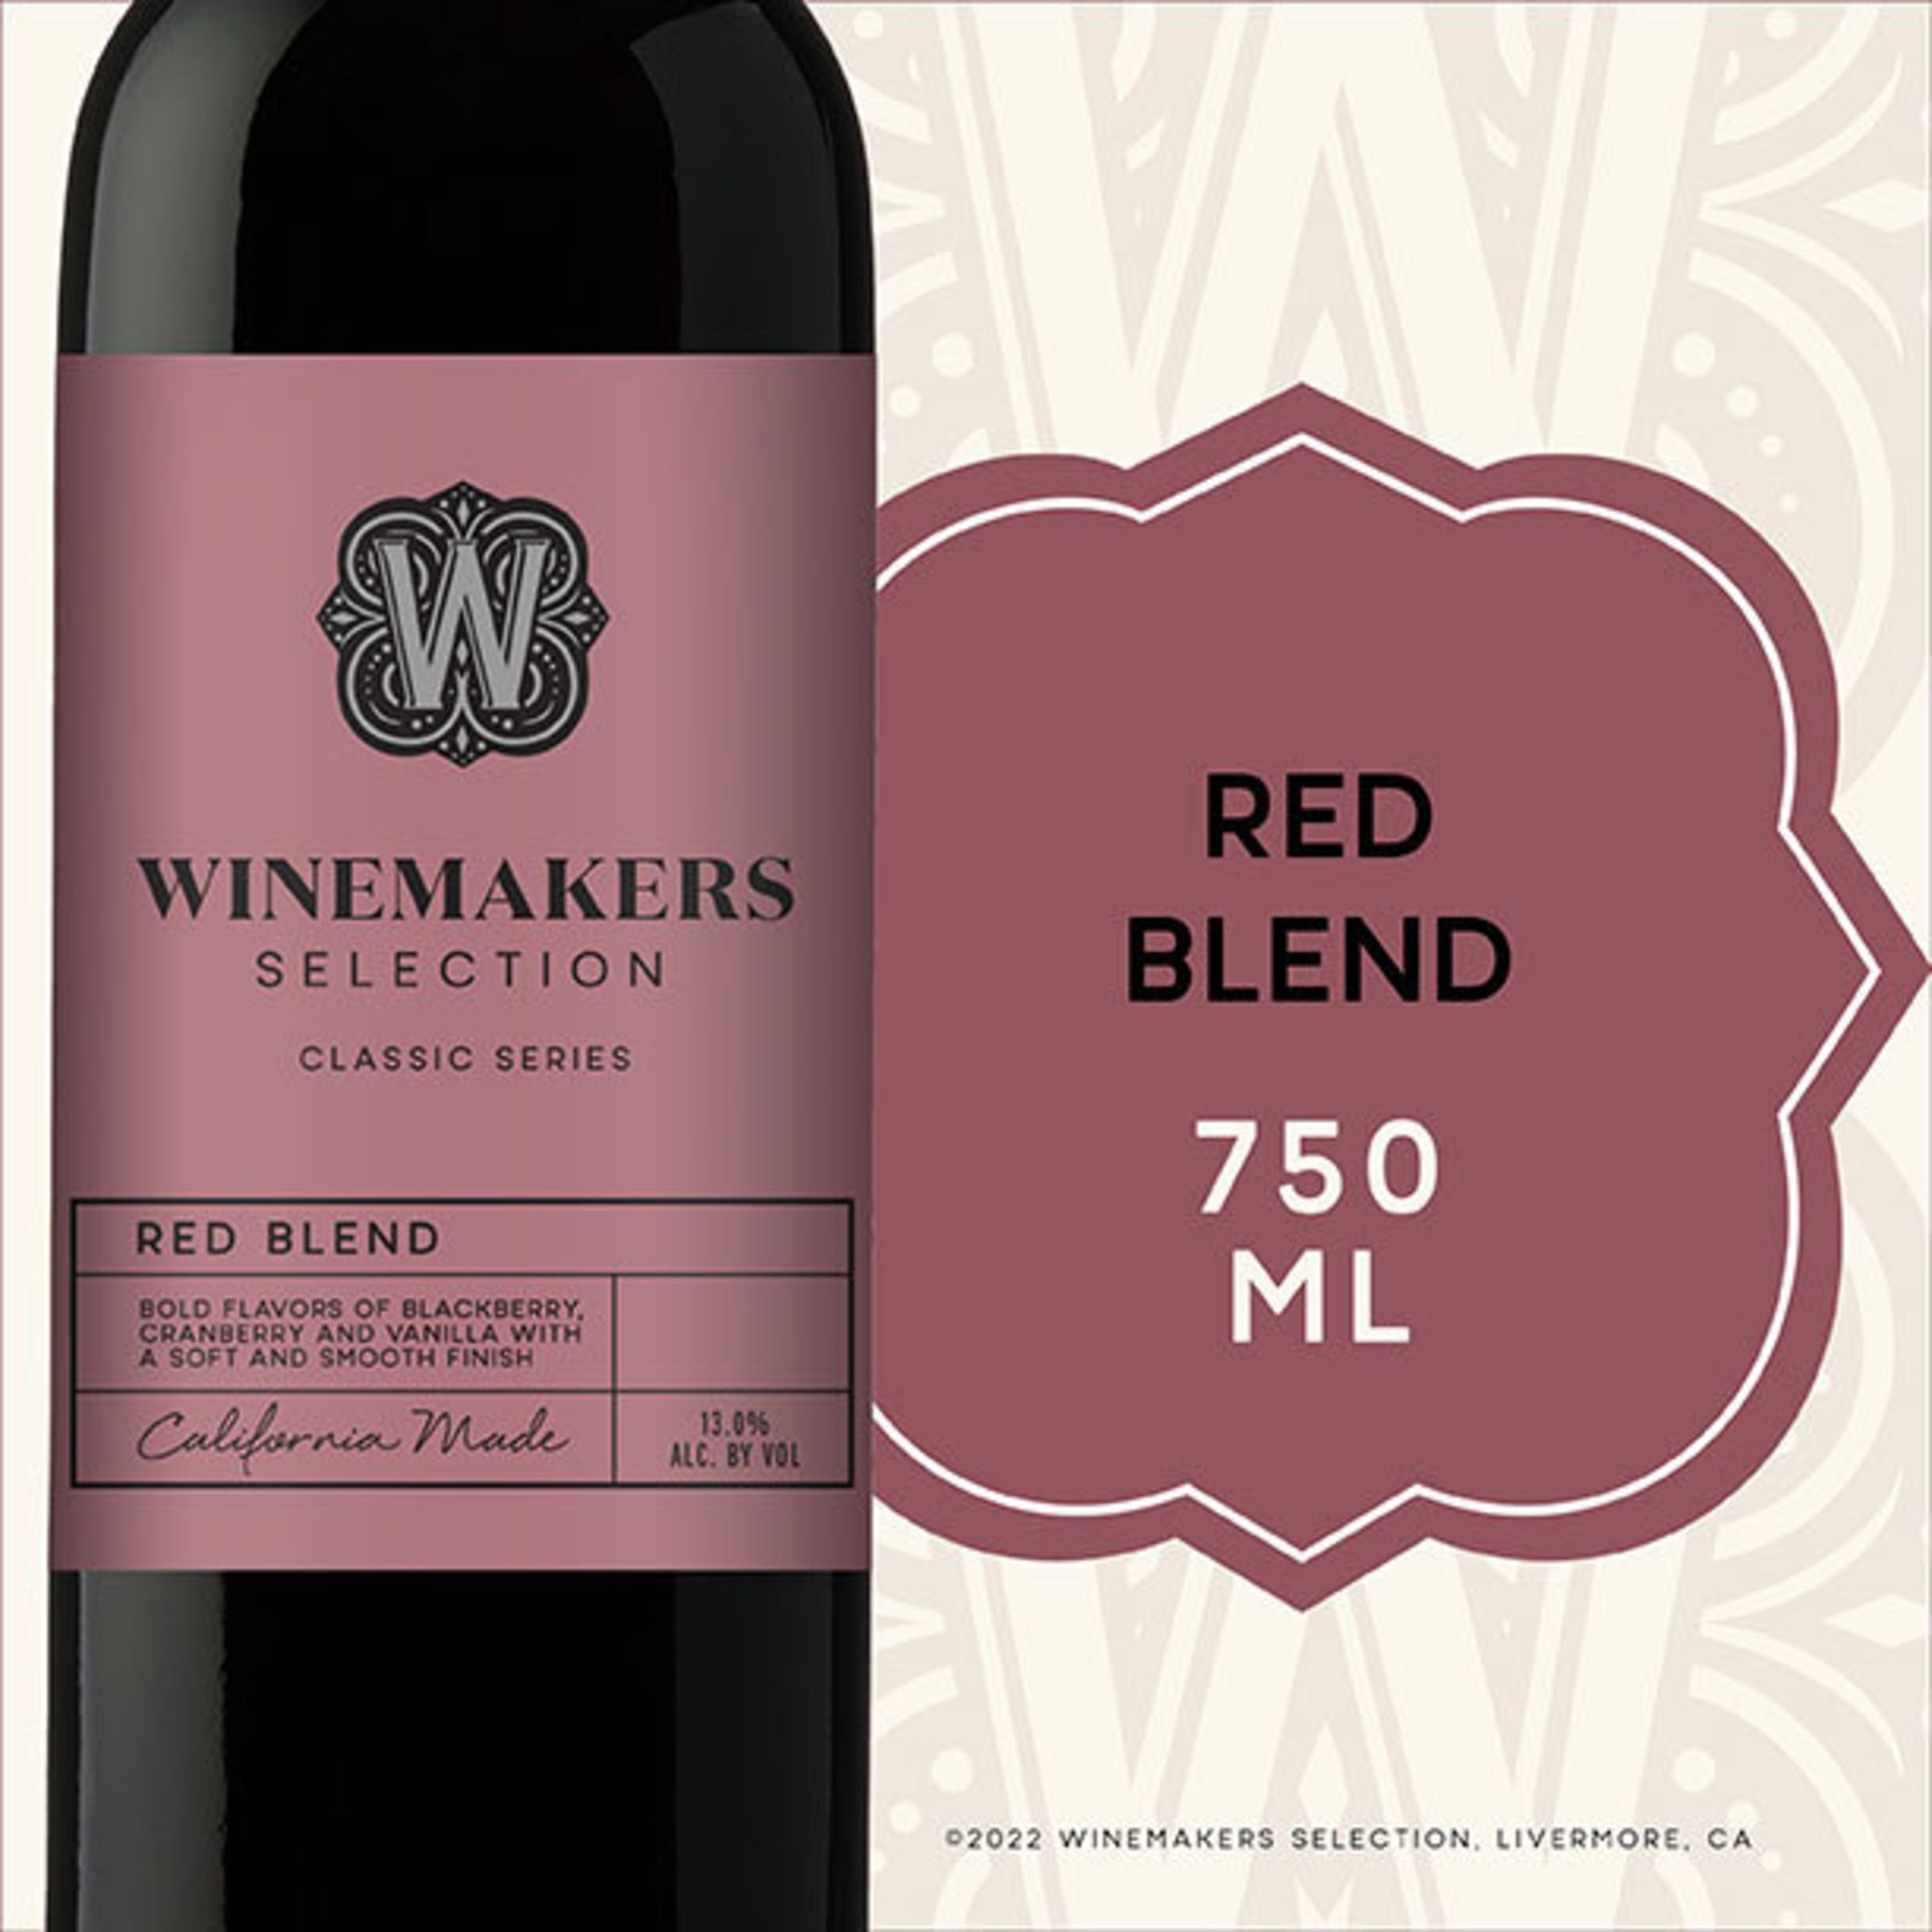 Winemakers Selection Red Blend Red Wine - 750ml, 2018 Walmart.com